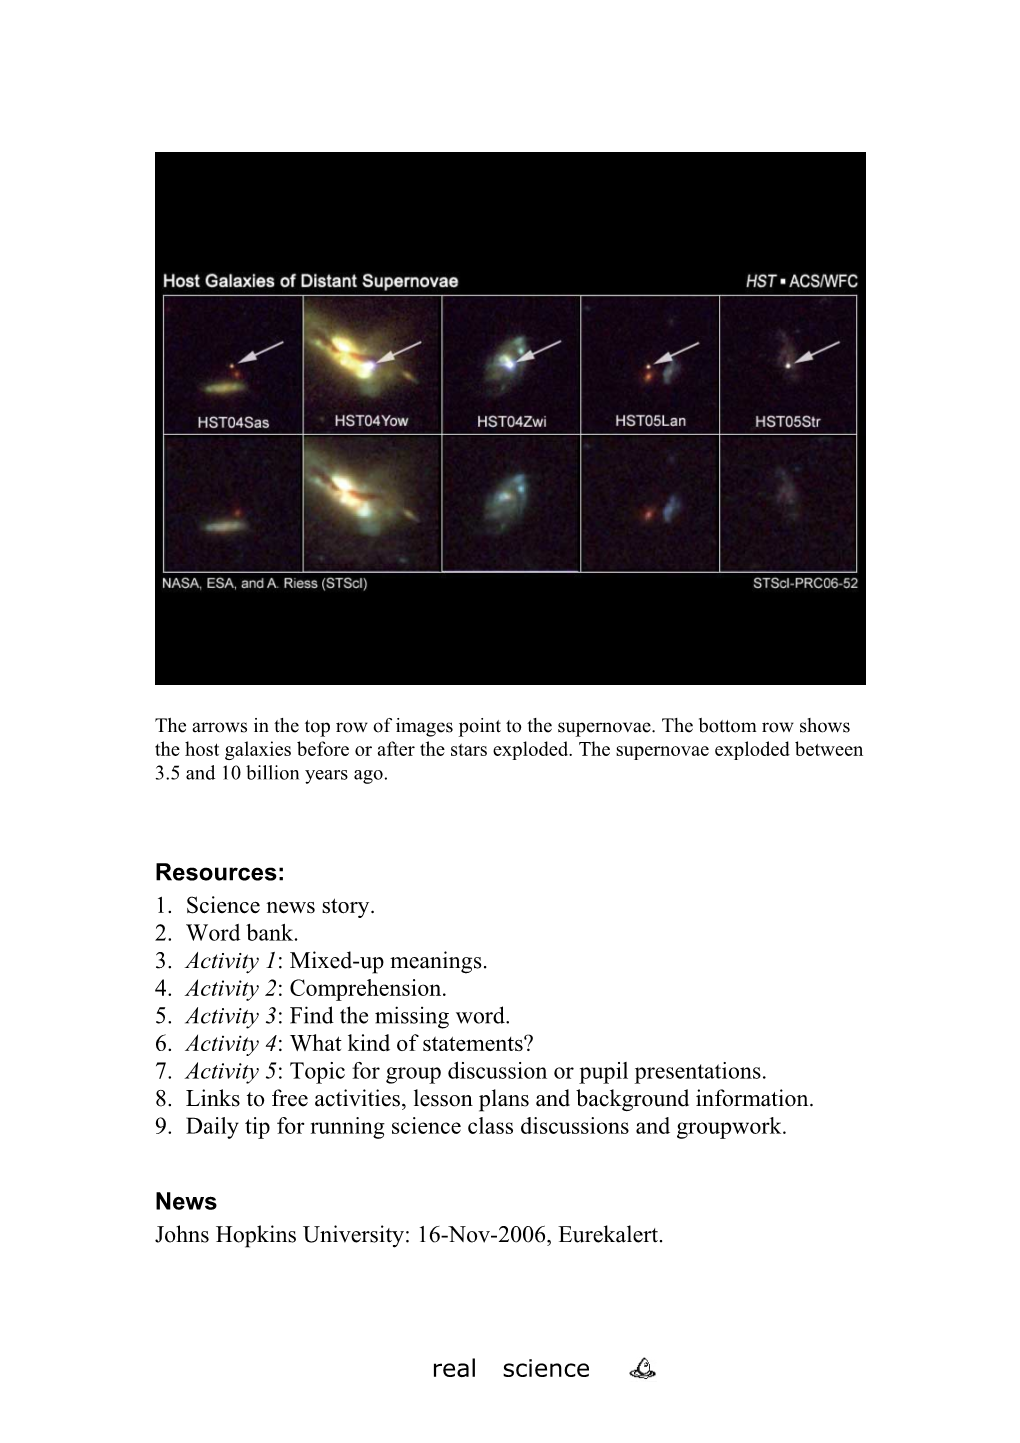 The Arrows in the Top Row of Images Point to the Supernovae. the Bottom Row Shows the Host